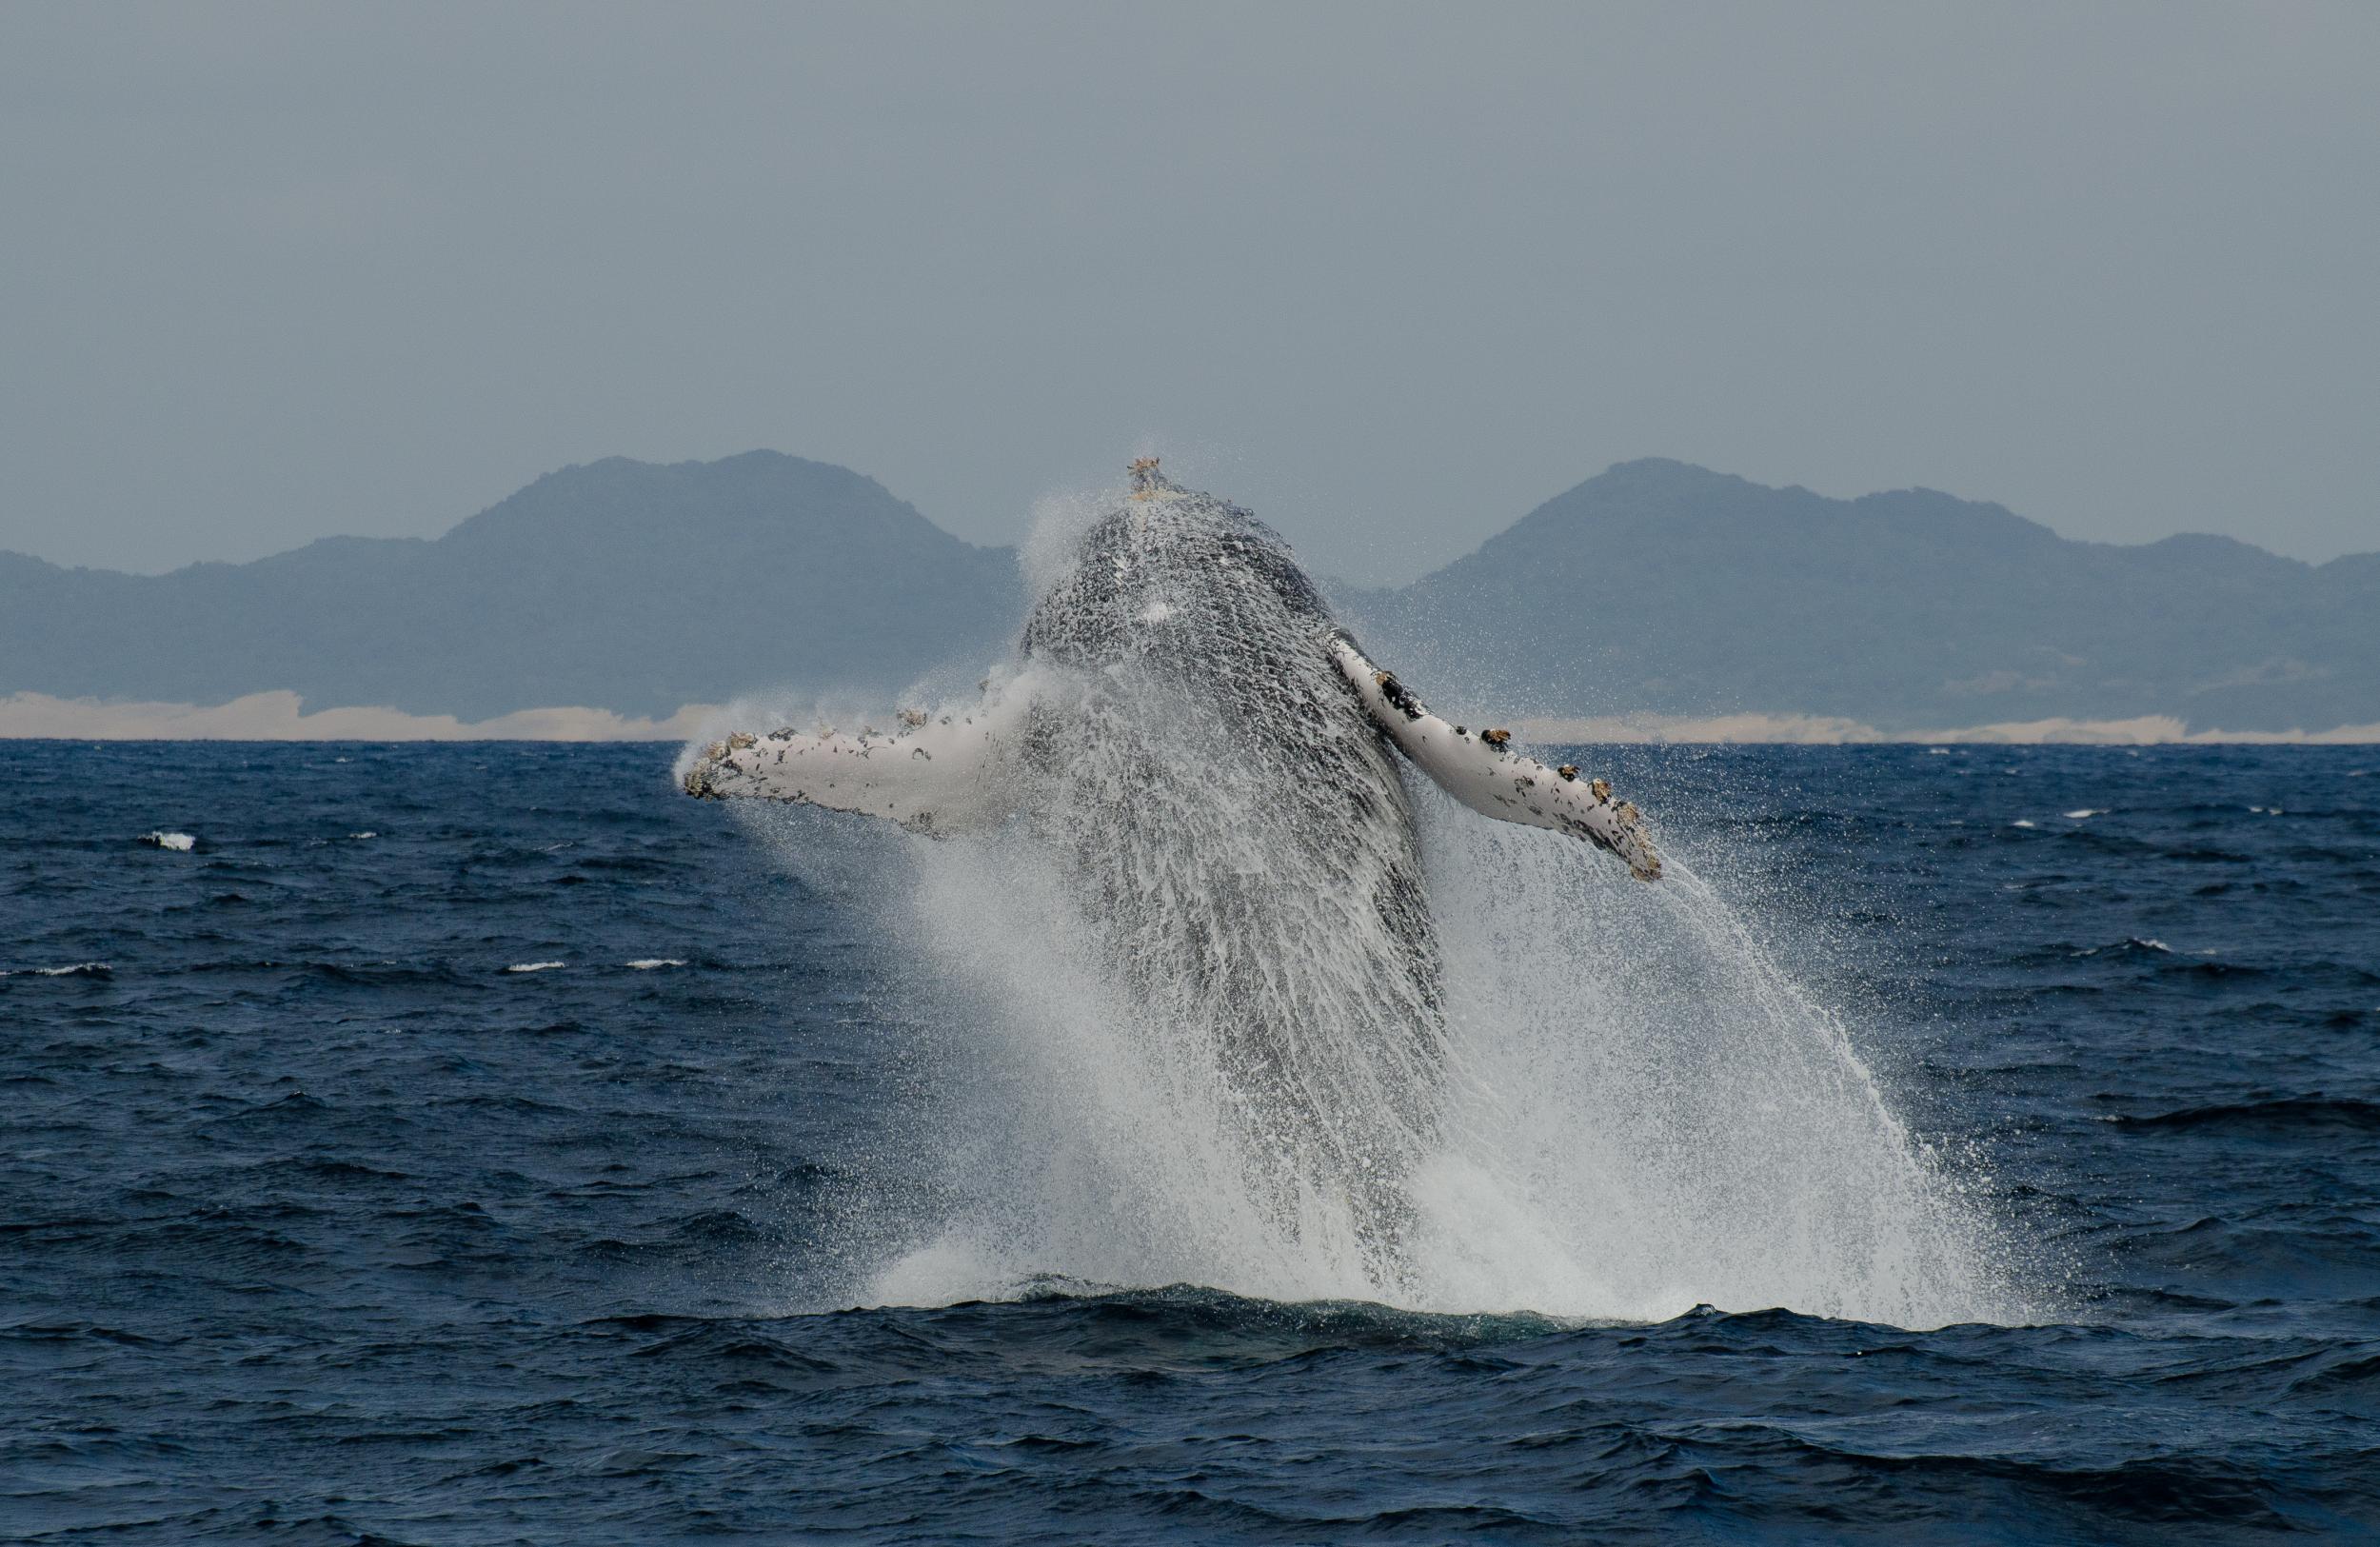 Catch sight of humpback whales along the coast